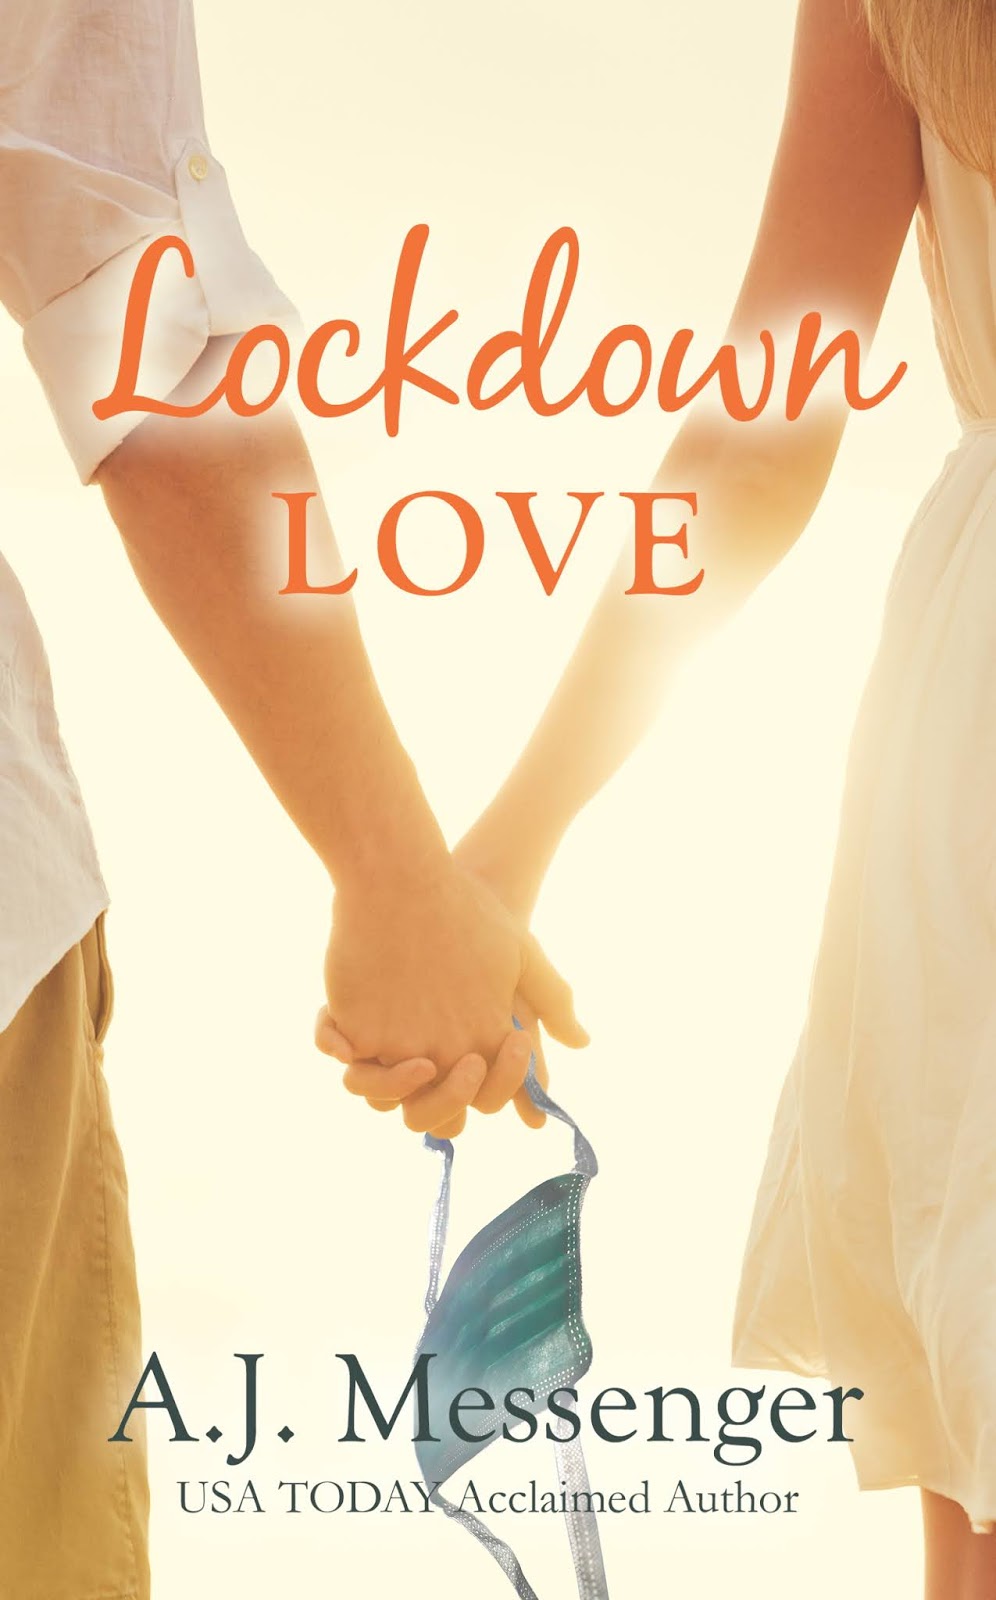 Lockdown Love is available now! A. J. Messenger